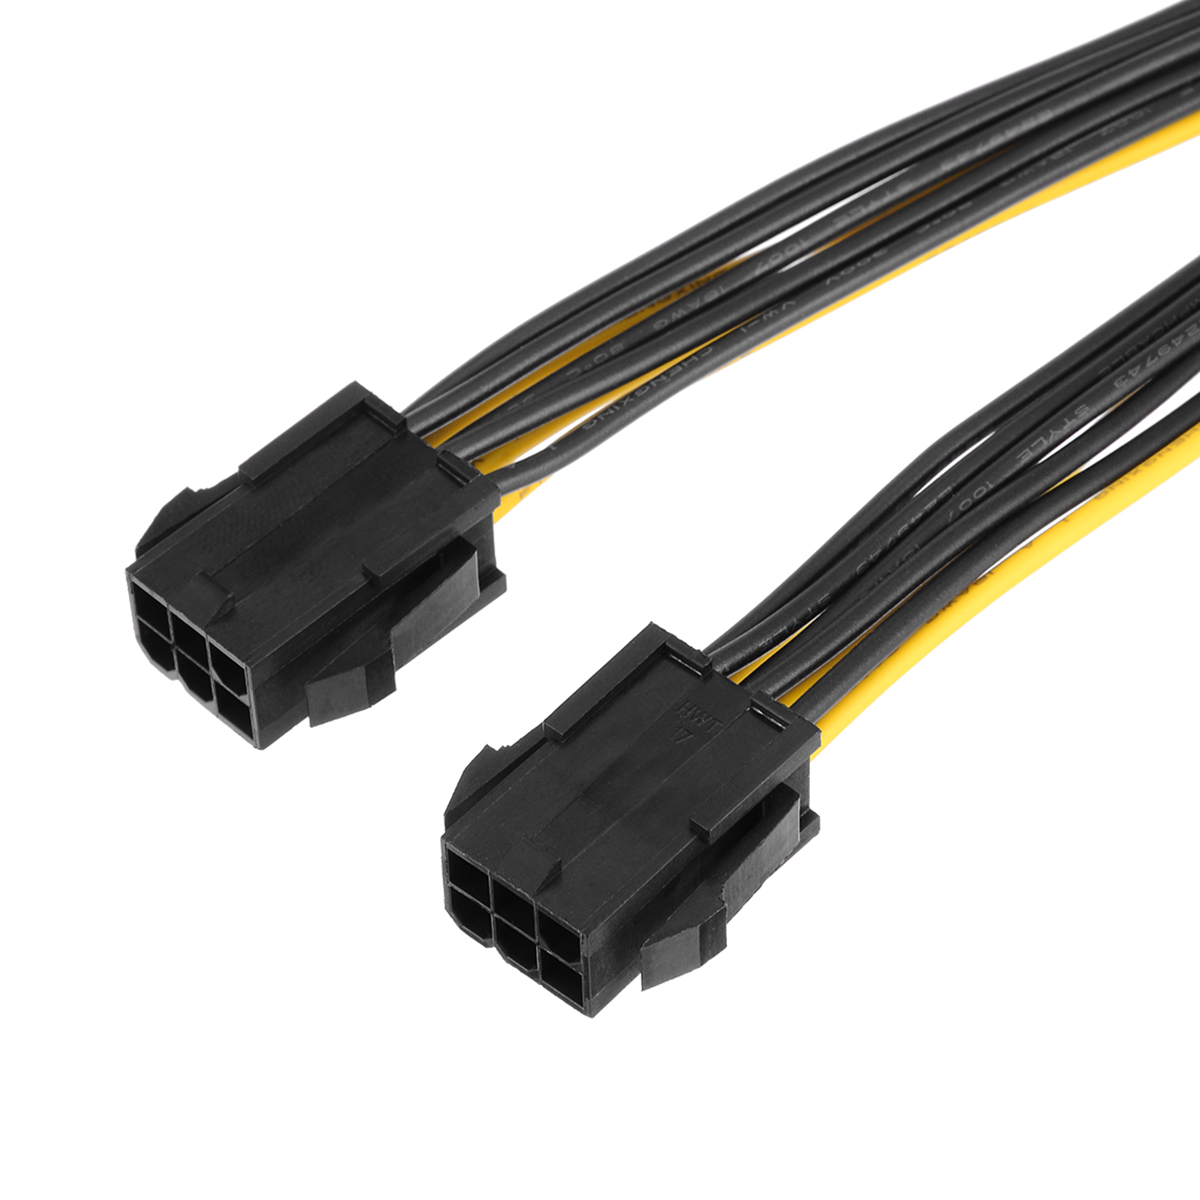 1pc Graphics Cards Power Cable 20cm Dual 6 Pin Female To Single 8 Pin Male For Computer Connector Accessories